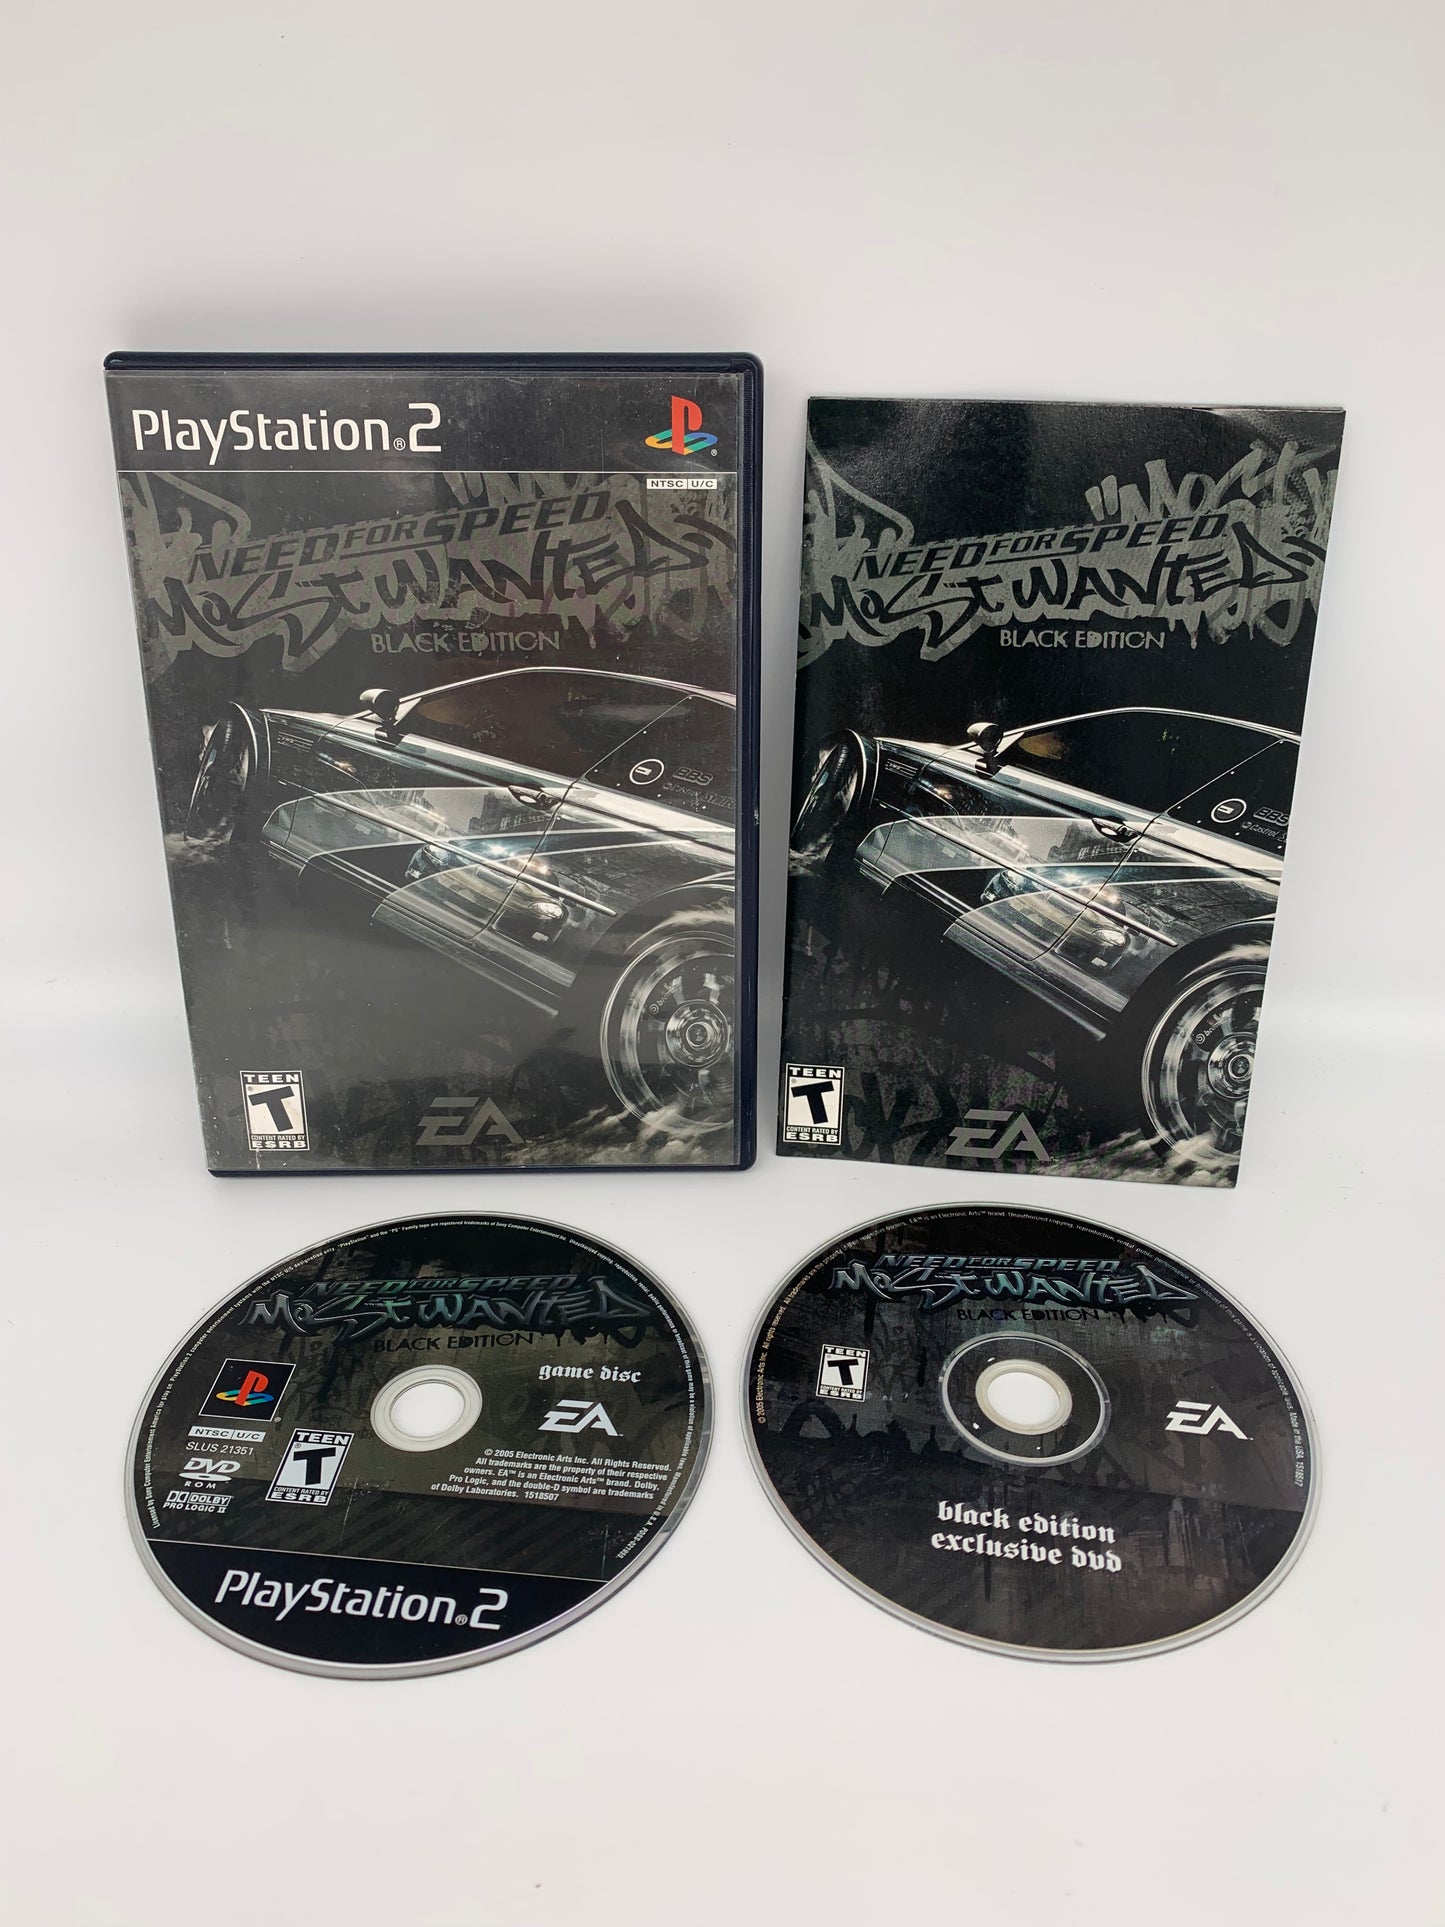 PiXEL-RETRO.COM : SONY PLAYSTATION 2 (PS2) COMPLET CIB BOX MANUAL GAME NTSC NEED FOR SPEED MOST WANTED BLACK EDITION